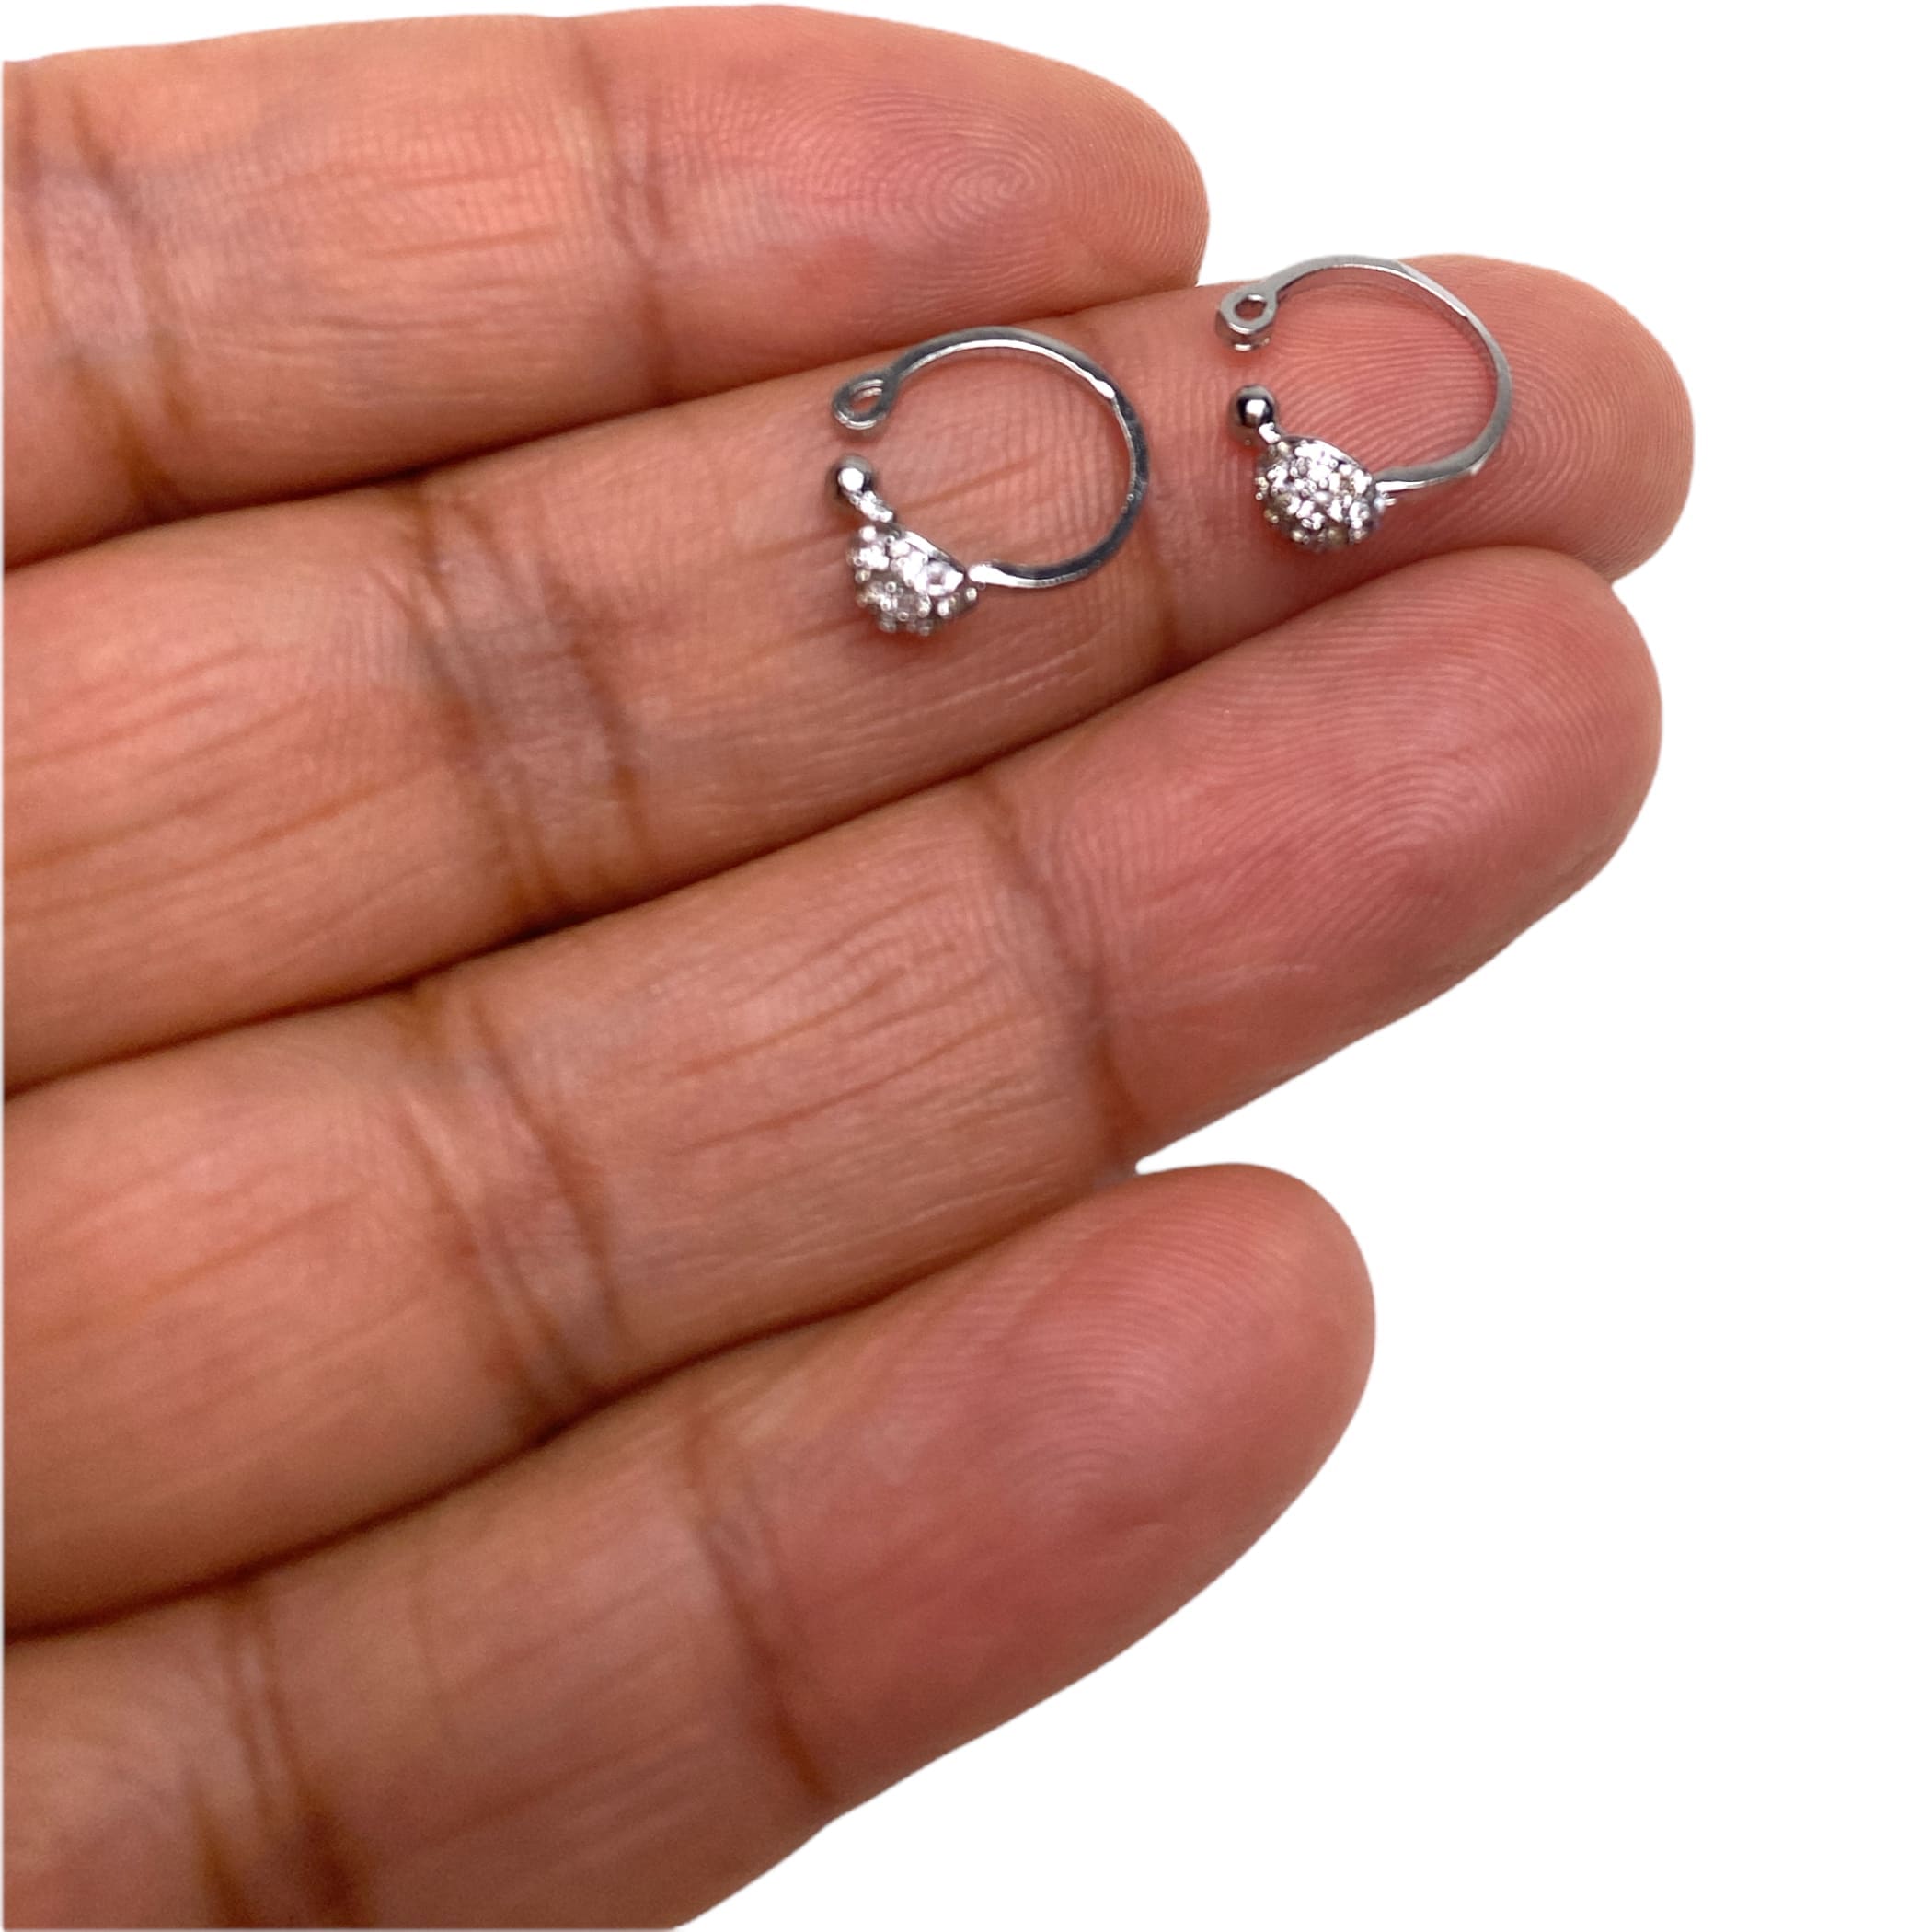 Buy Mine Platinum PT 950 Two Tone Purity Studs Earring for Women Online